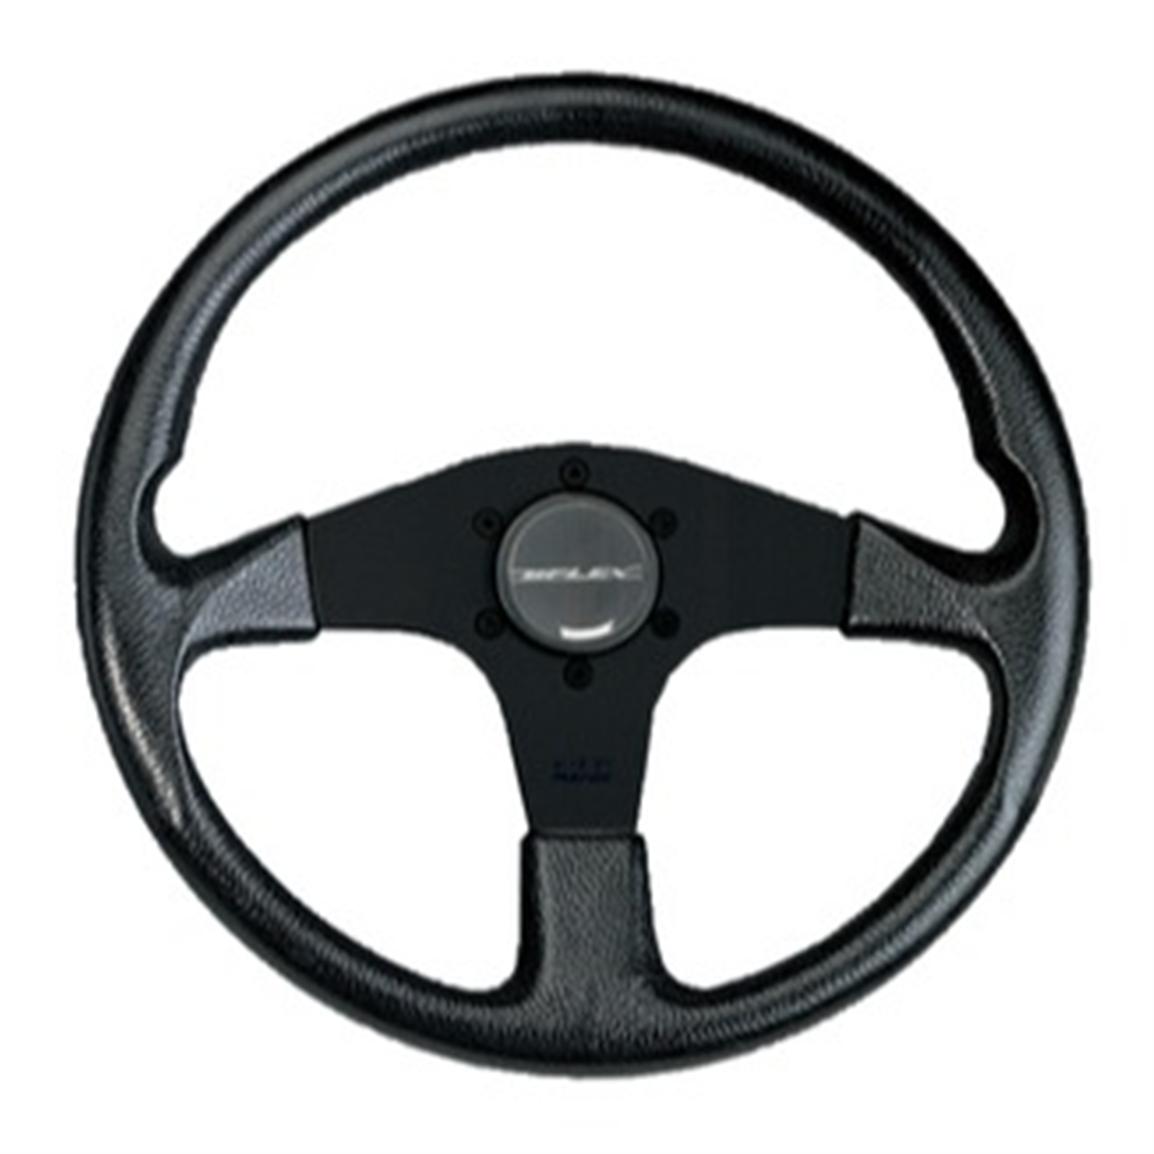 A black and silver steering w